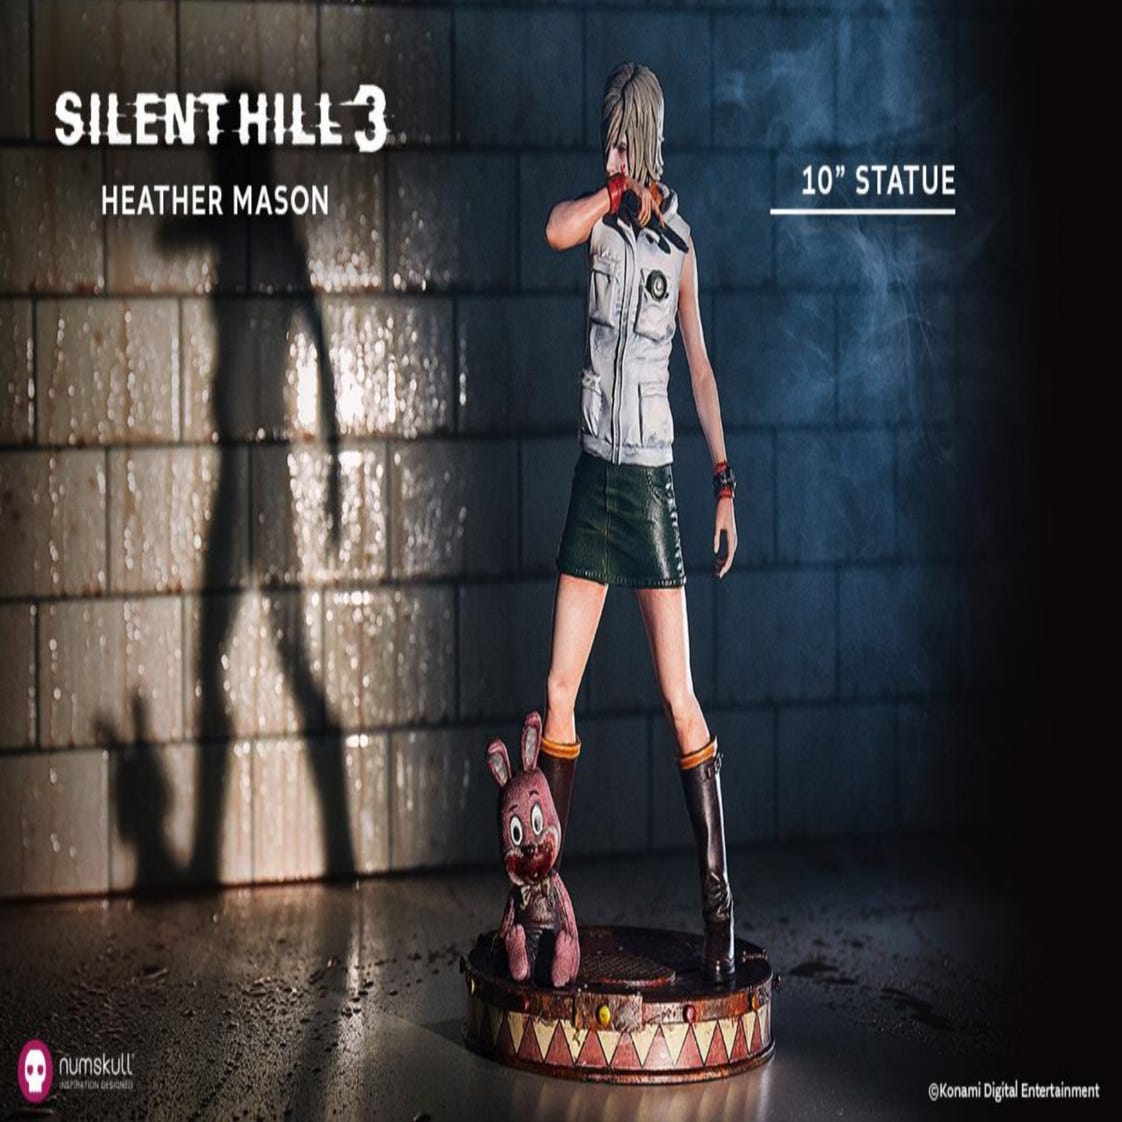 Numskull’s next Silent Hill collectible is a 10″ statue of Silent Hill 3’s Heather